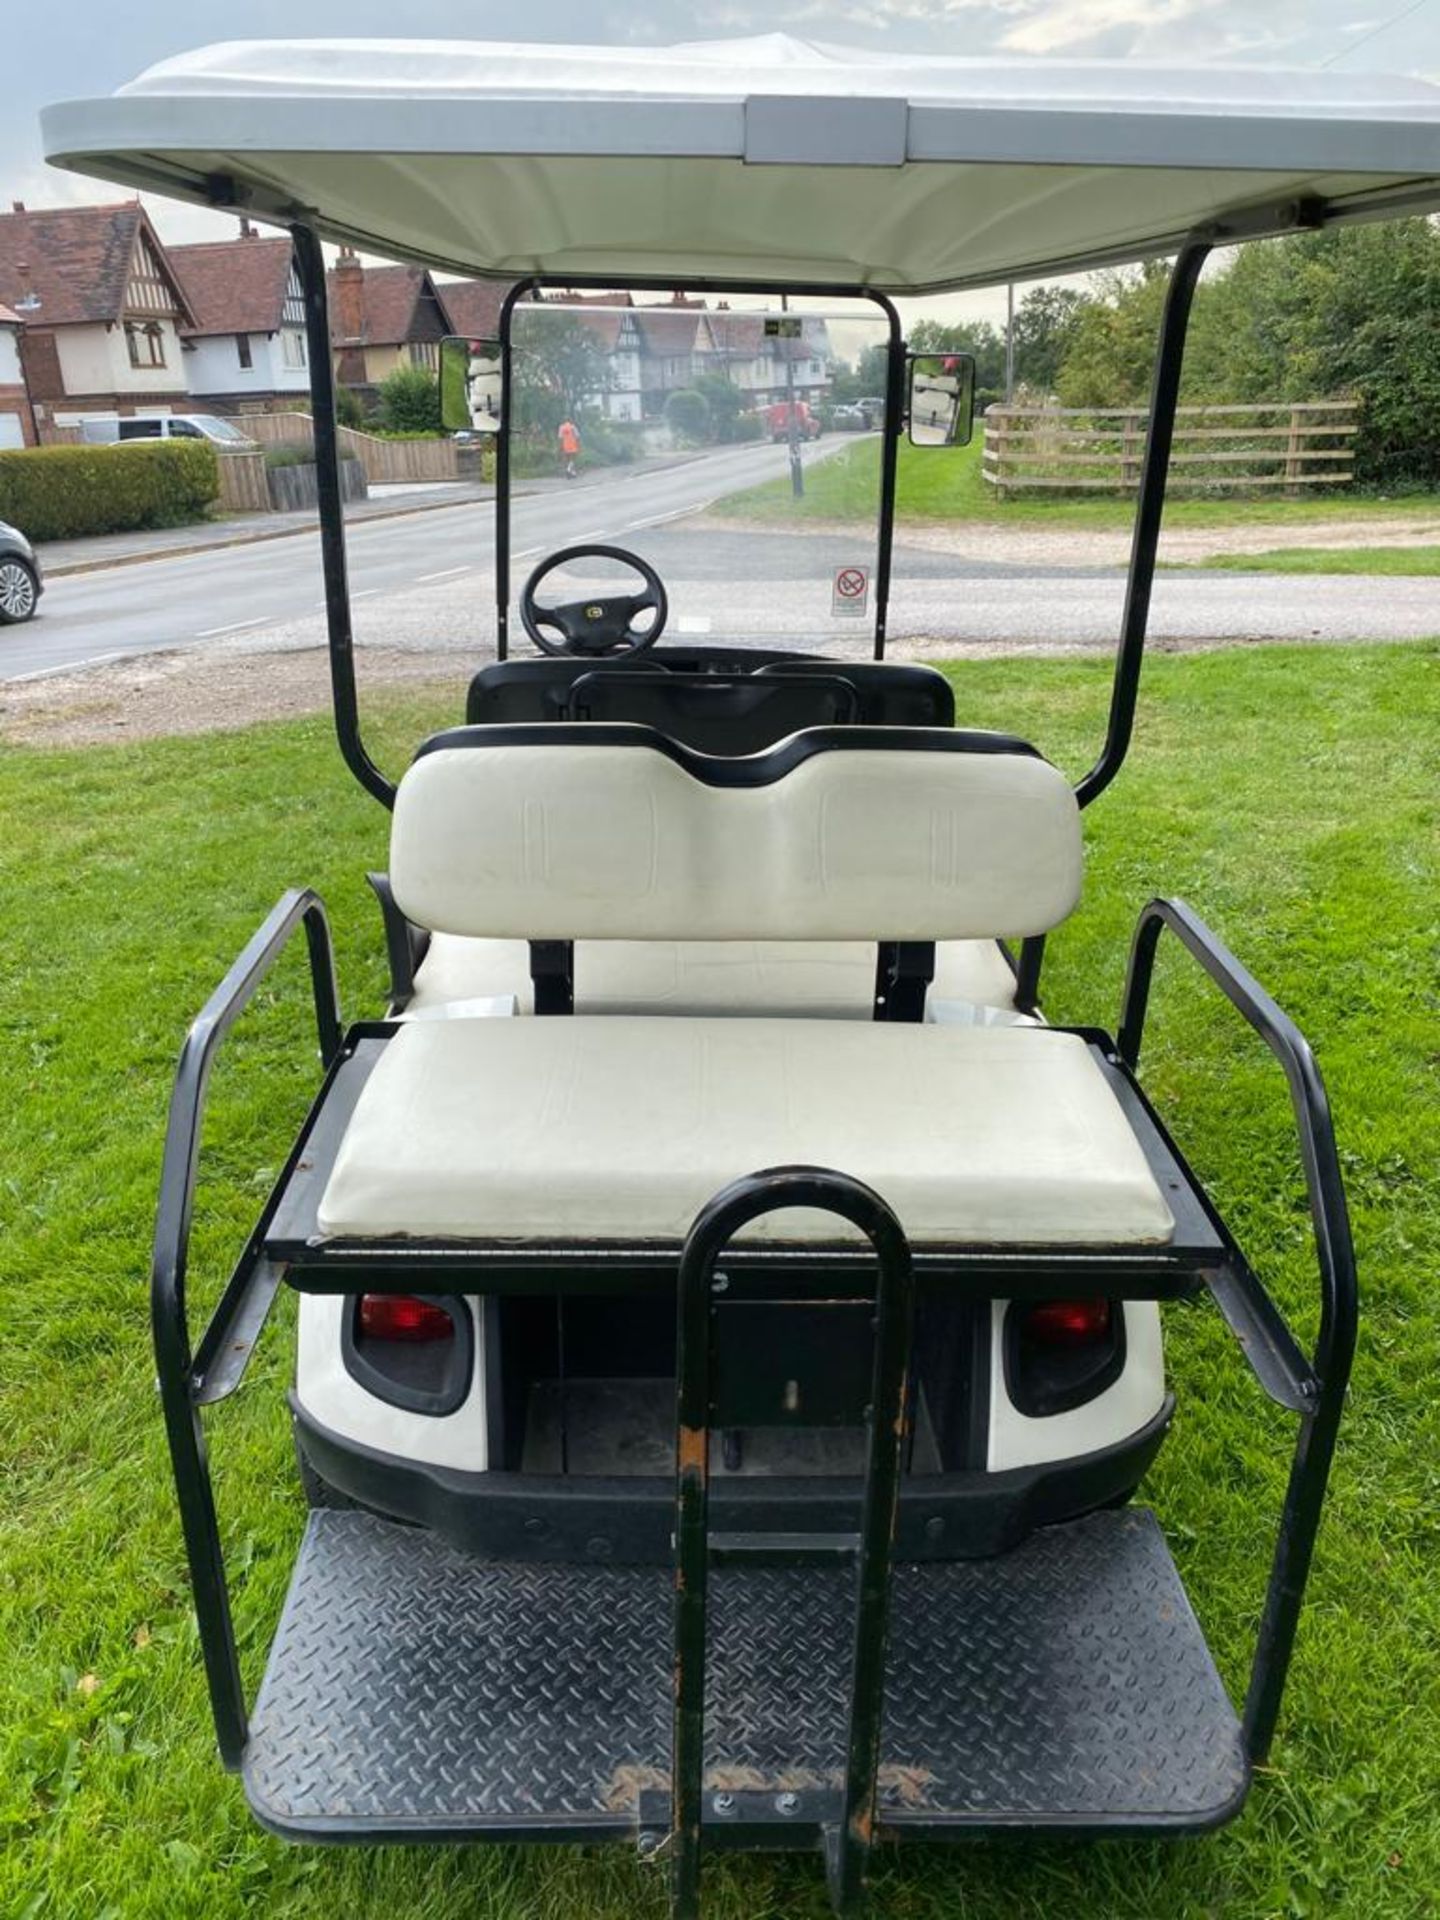 GOLFBUGGY 6 SEATER, CUSHMAN SHUTTLE 6, ELECTRIC, YEAR 2016, VERY LITTLE USE, FULL SUN CANOPY - Image 6 of 6